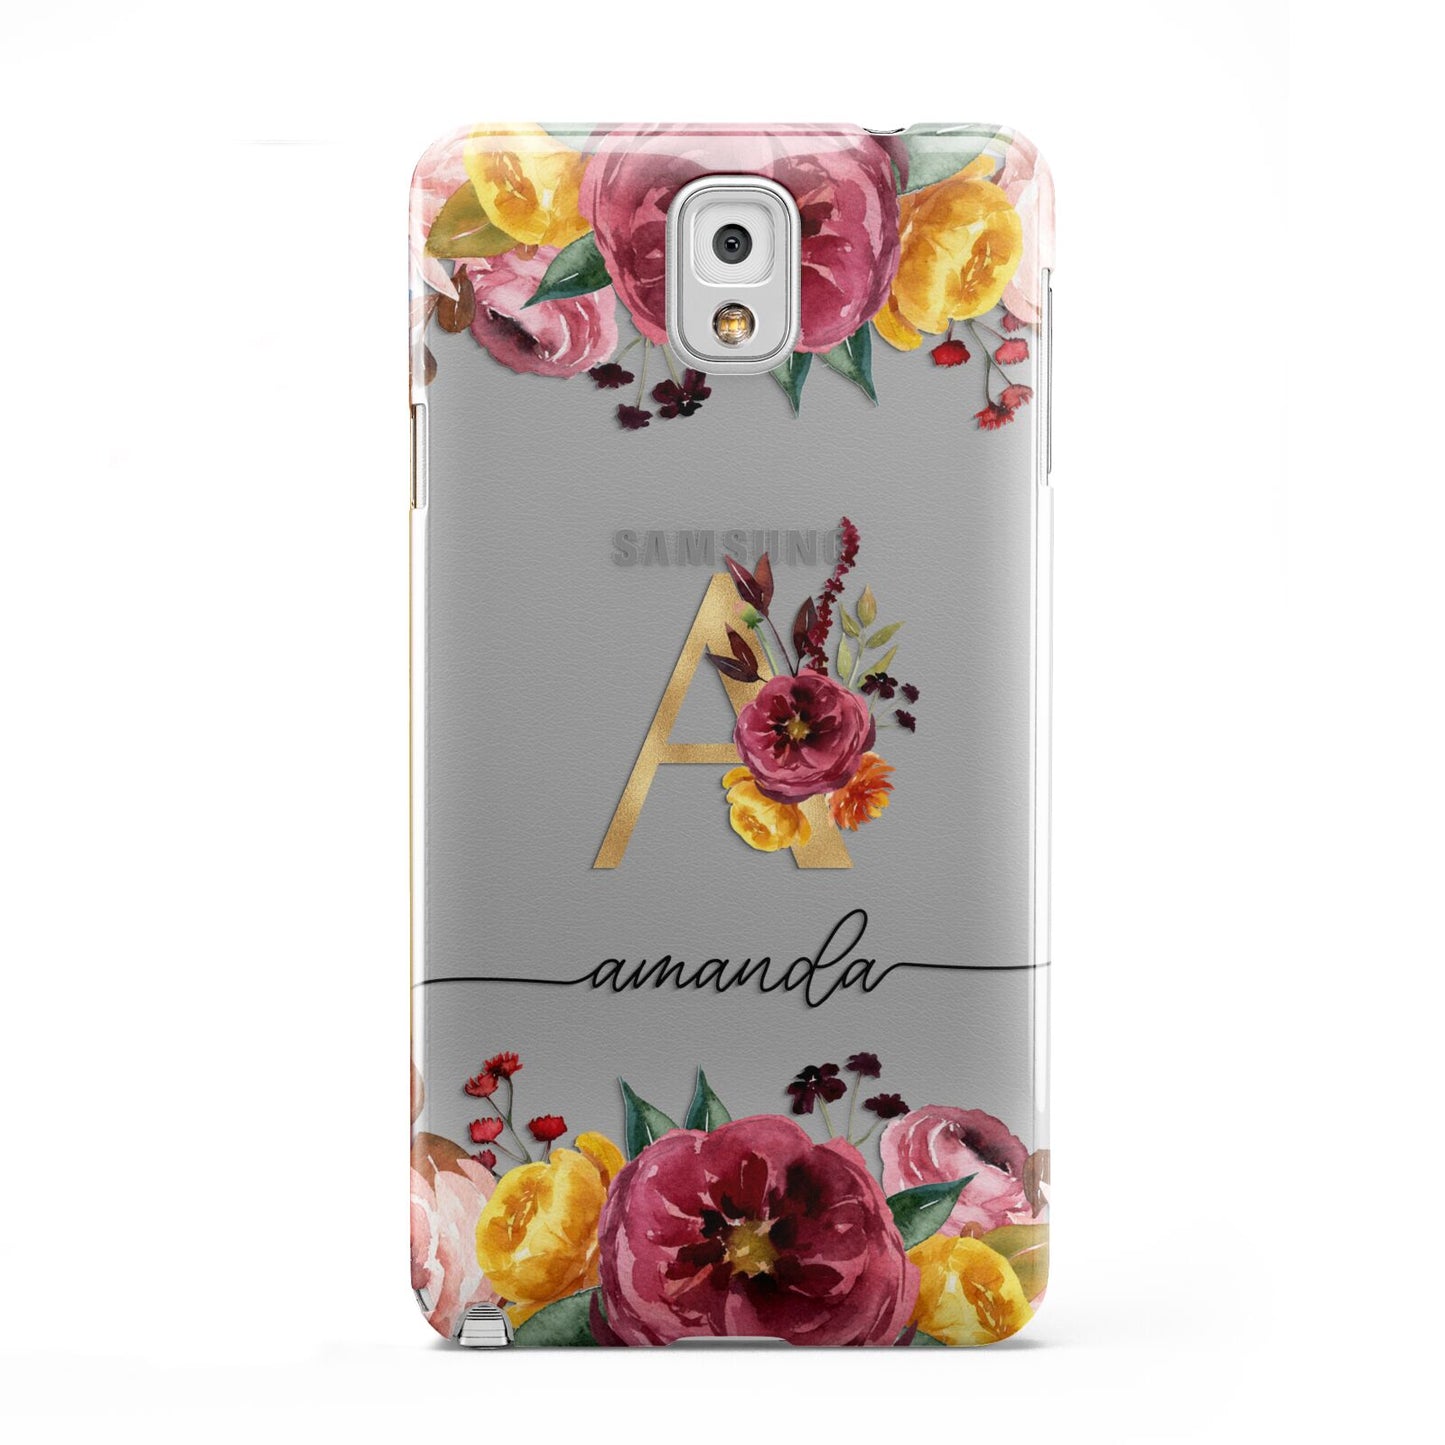 Autumn Watercolour Flowers with Initial Samsung Galaxy Note 3 Case